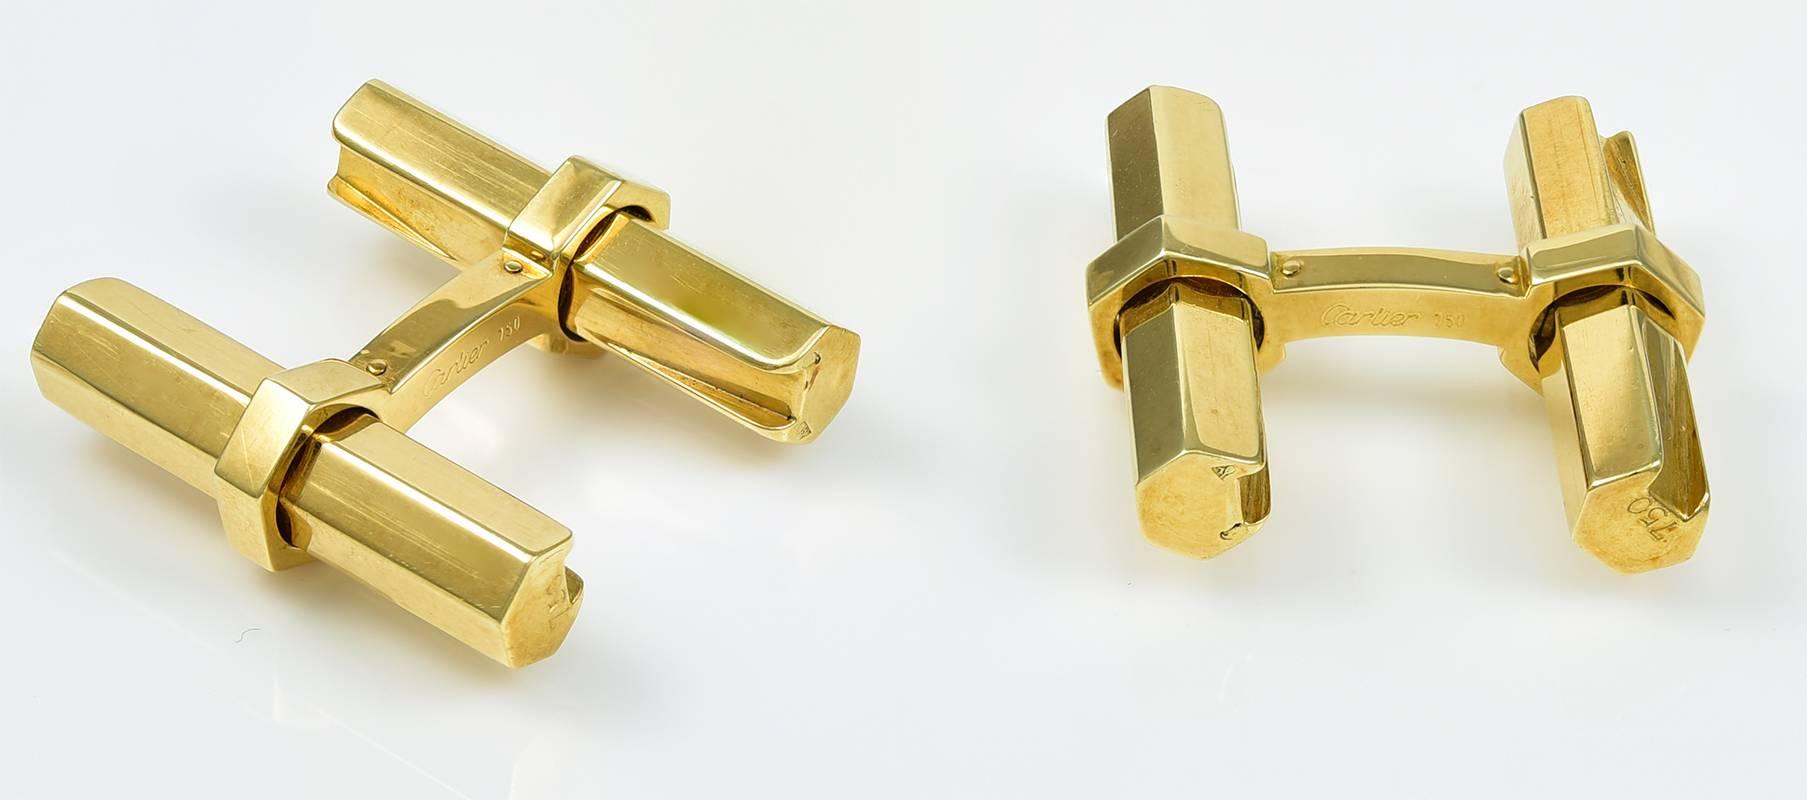 Classic and elegant beveled "baton" cufflinks.  Made, signed and numbered by CARTIER.  18K yellow gold.  1" x 1."  Easy to use and in impeccable taste.

Alice Kwartler has sold the finest antique gold and diamond jewelry and